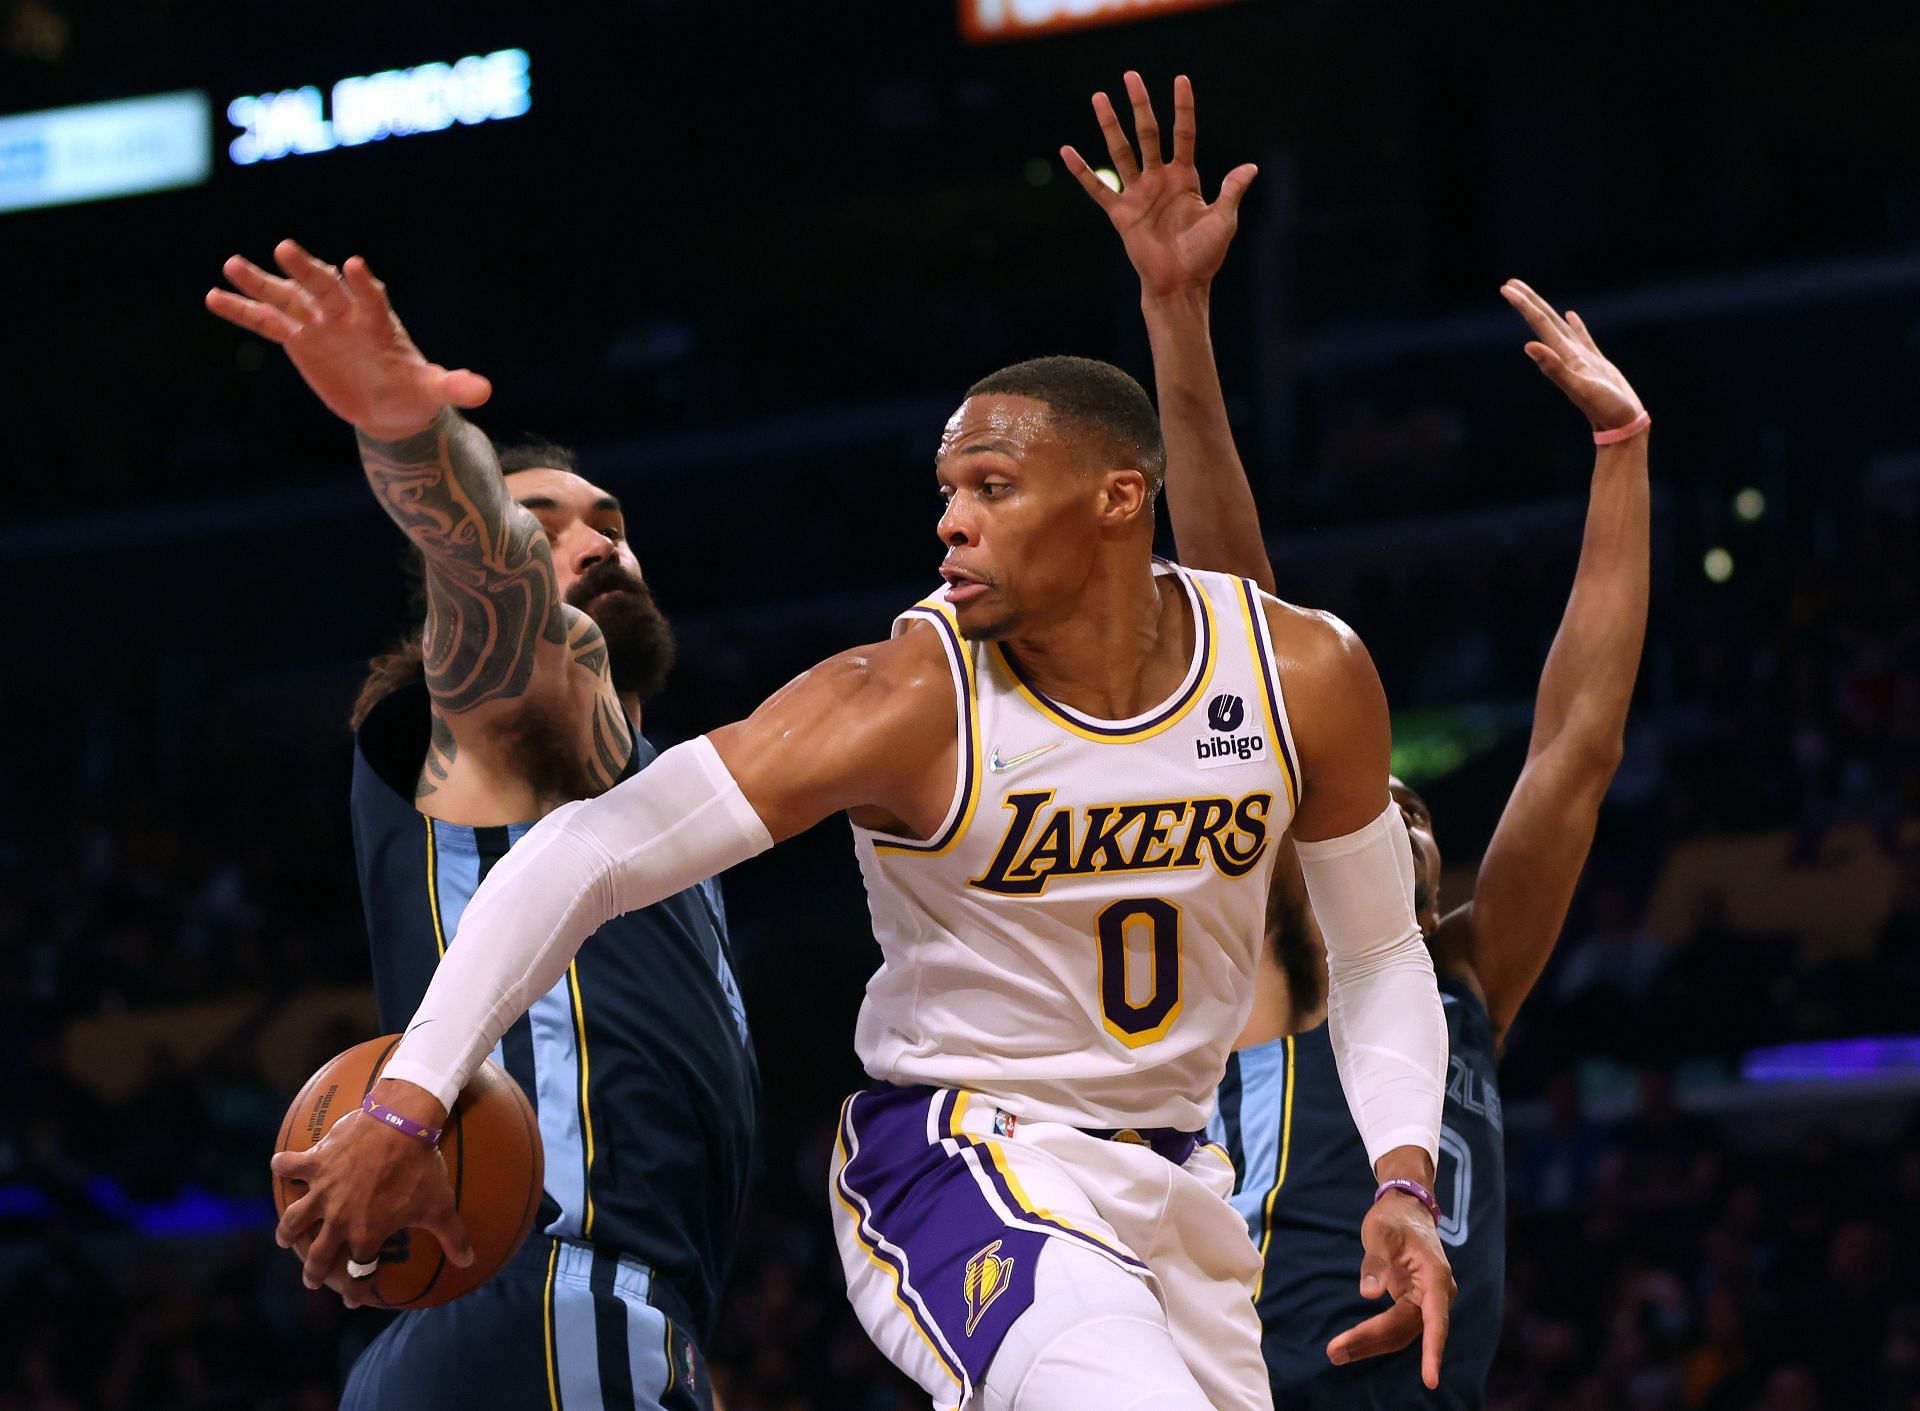 Los Angeles Lakers Russell Westbrook making a behind the back pass against the Memphis Grizzlies